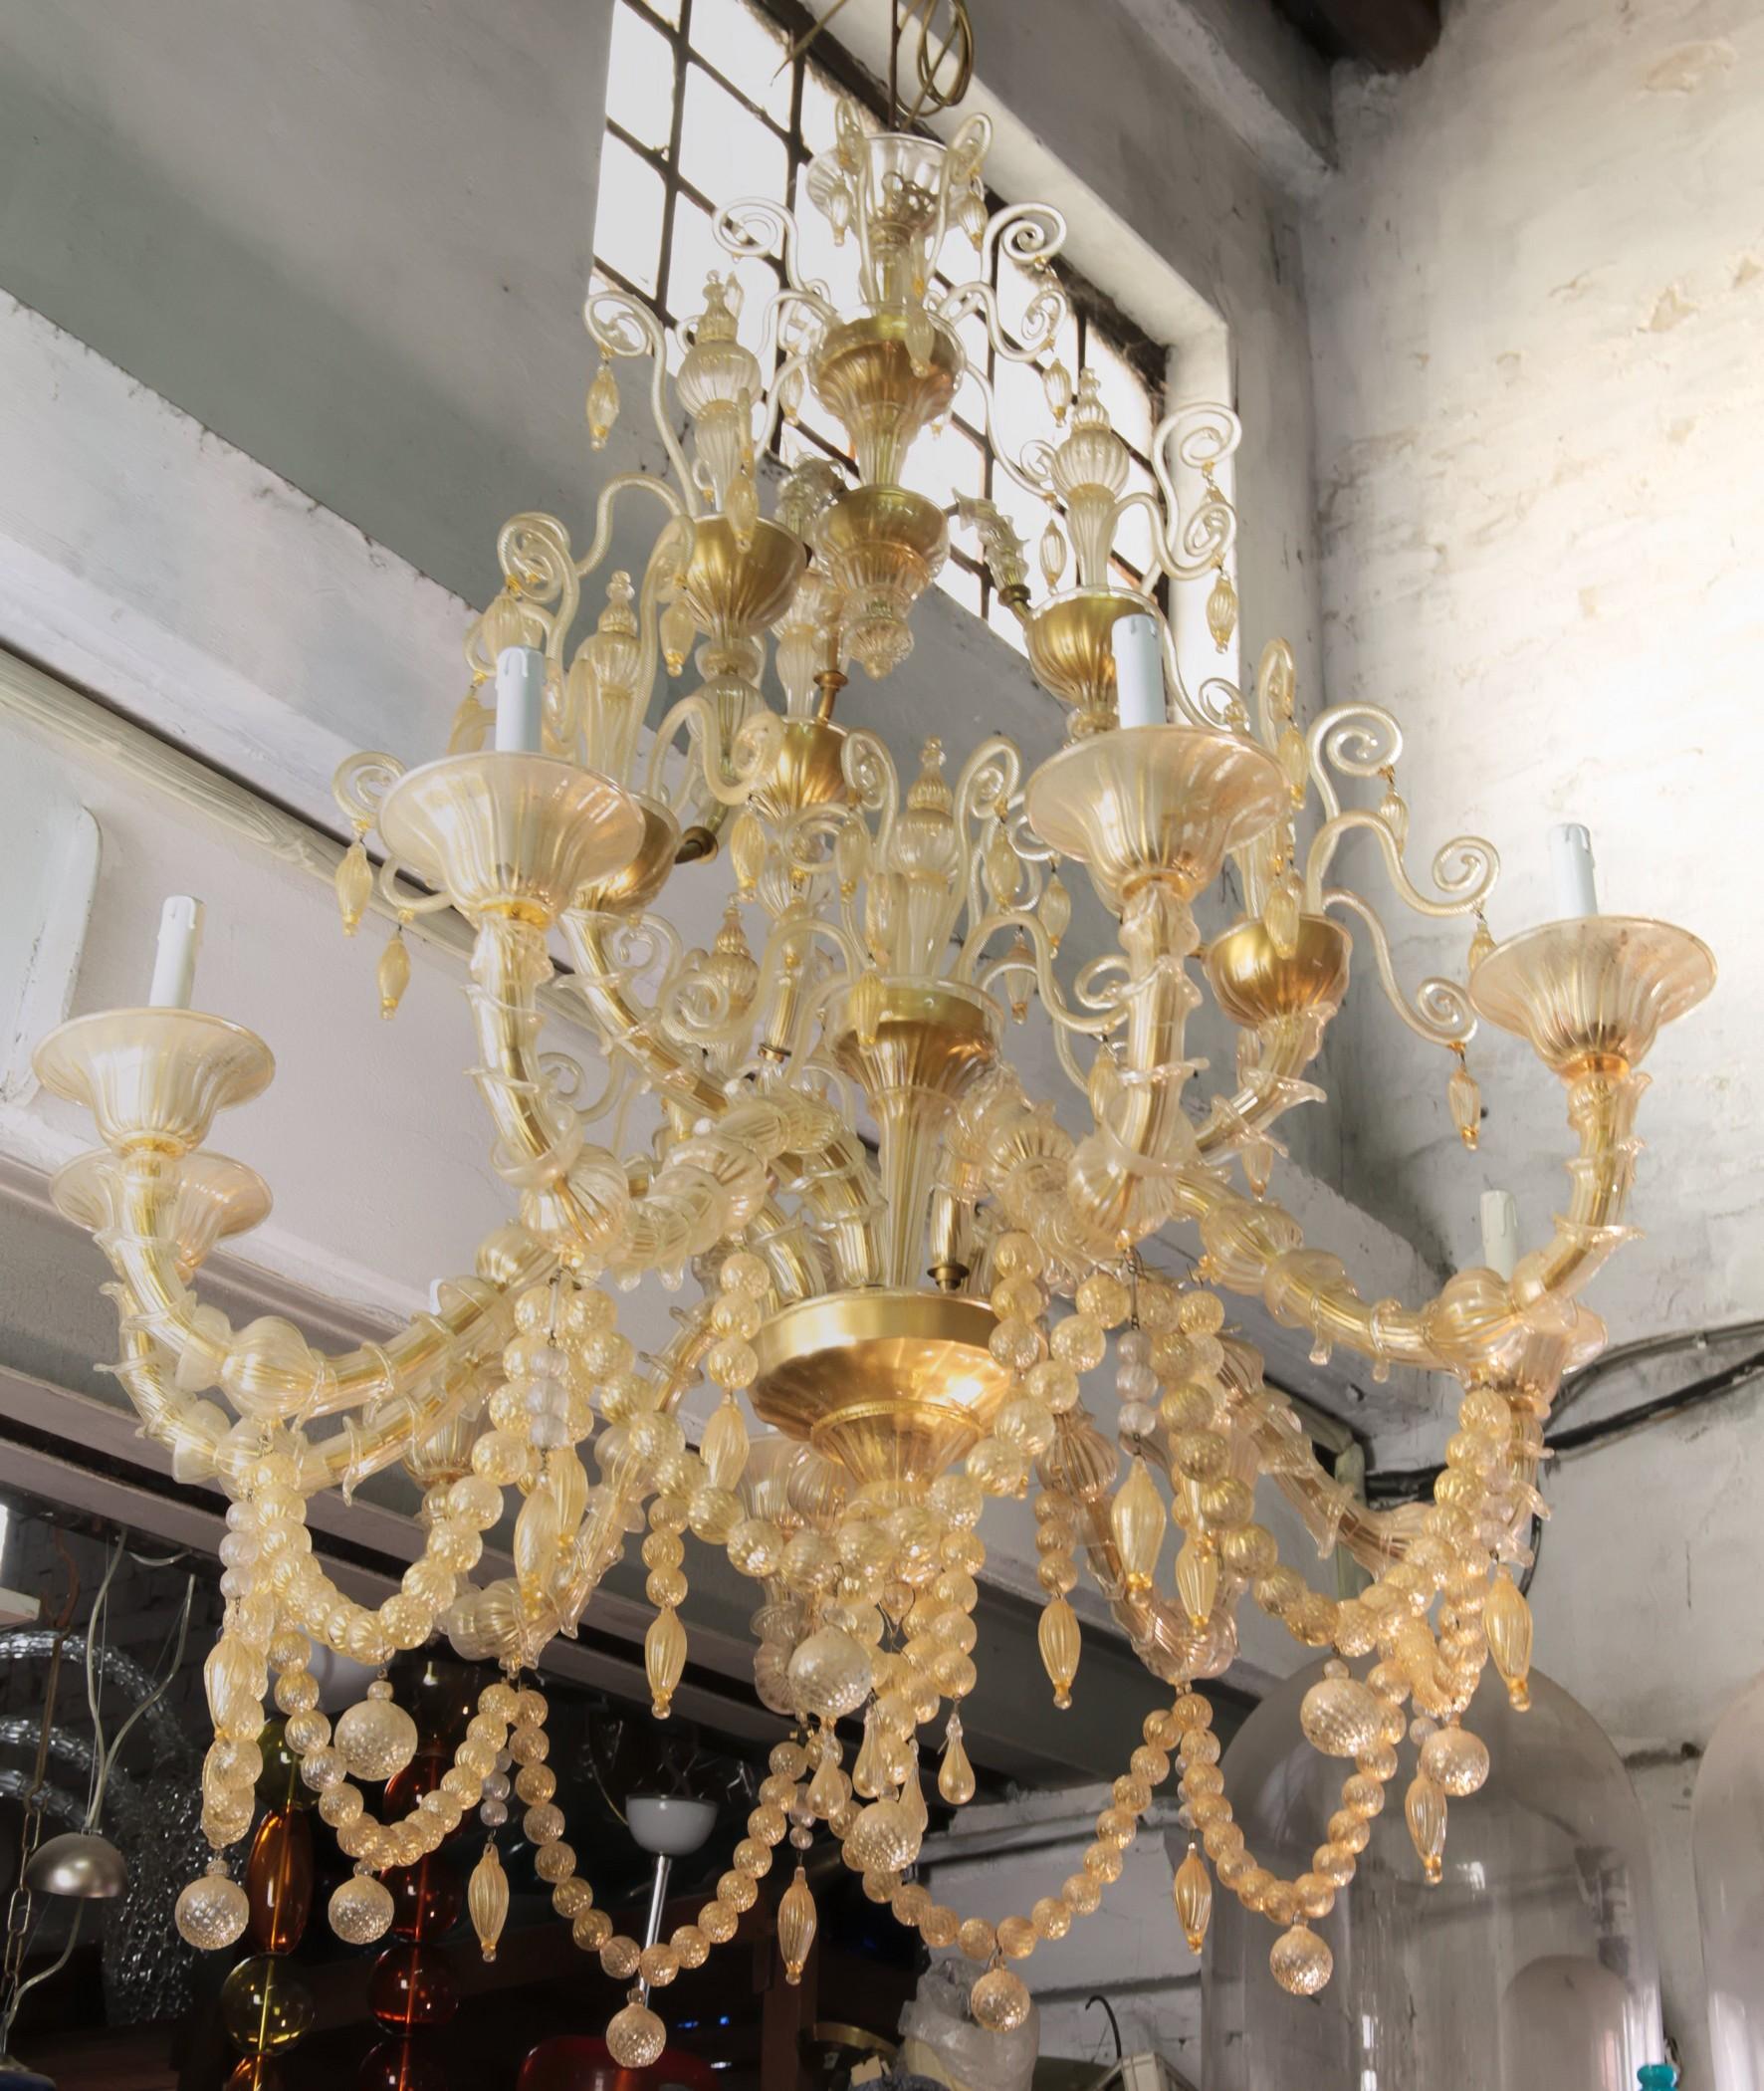 Hand-Crafted Cesare Toso Pearl Rezzonico Chandelier 9 Arms All in Gold Leaf over Clear, 1980s